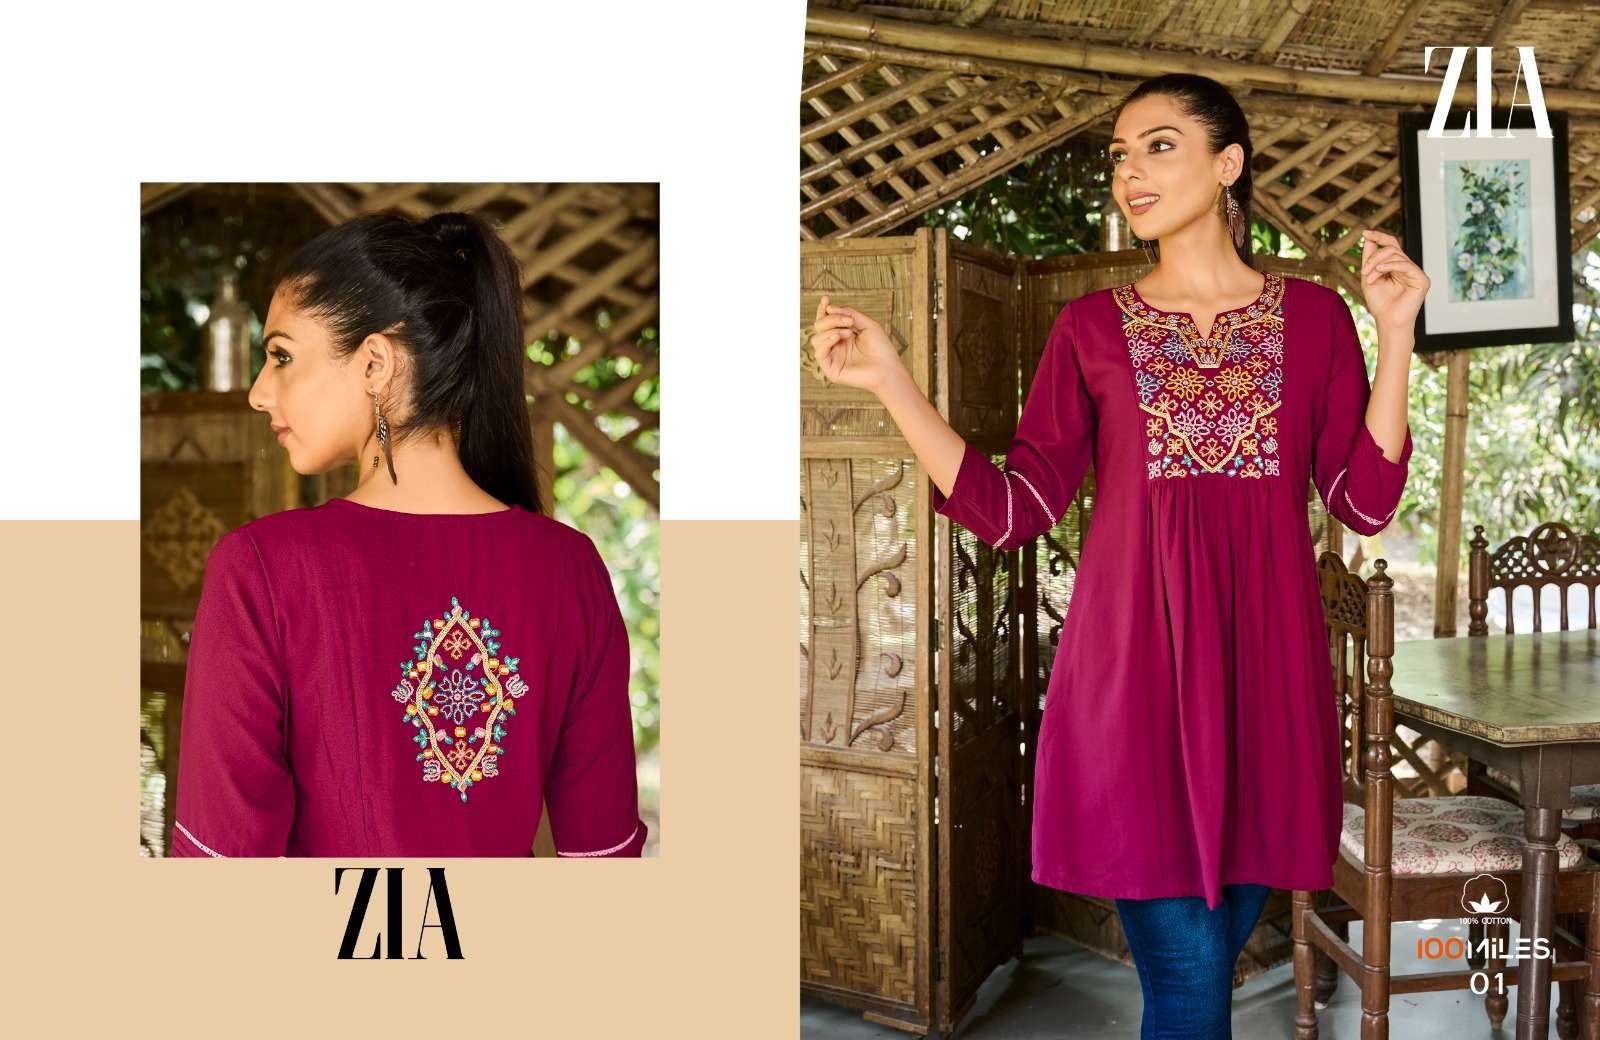 Zia By 100 Miles 01 To 04 Series Beautiful Stylish Fancy Colorful Casual Wear & Ethnic Wear Premium Georgette Tops At Wholesale Price